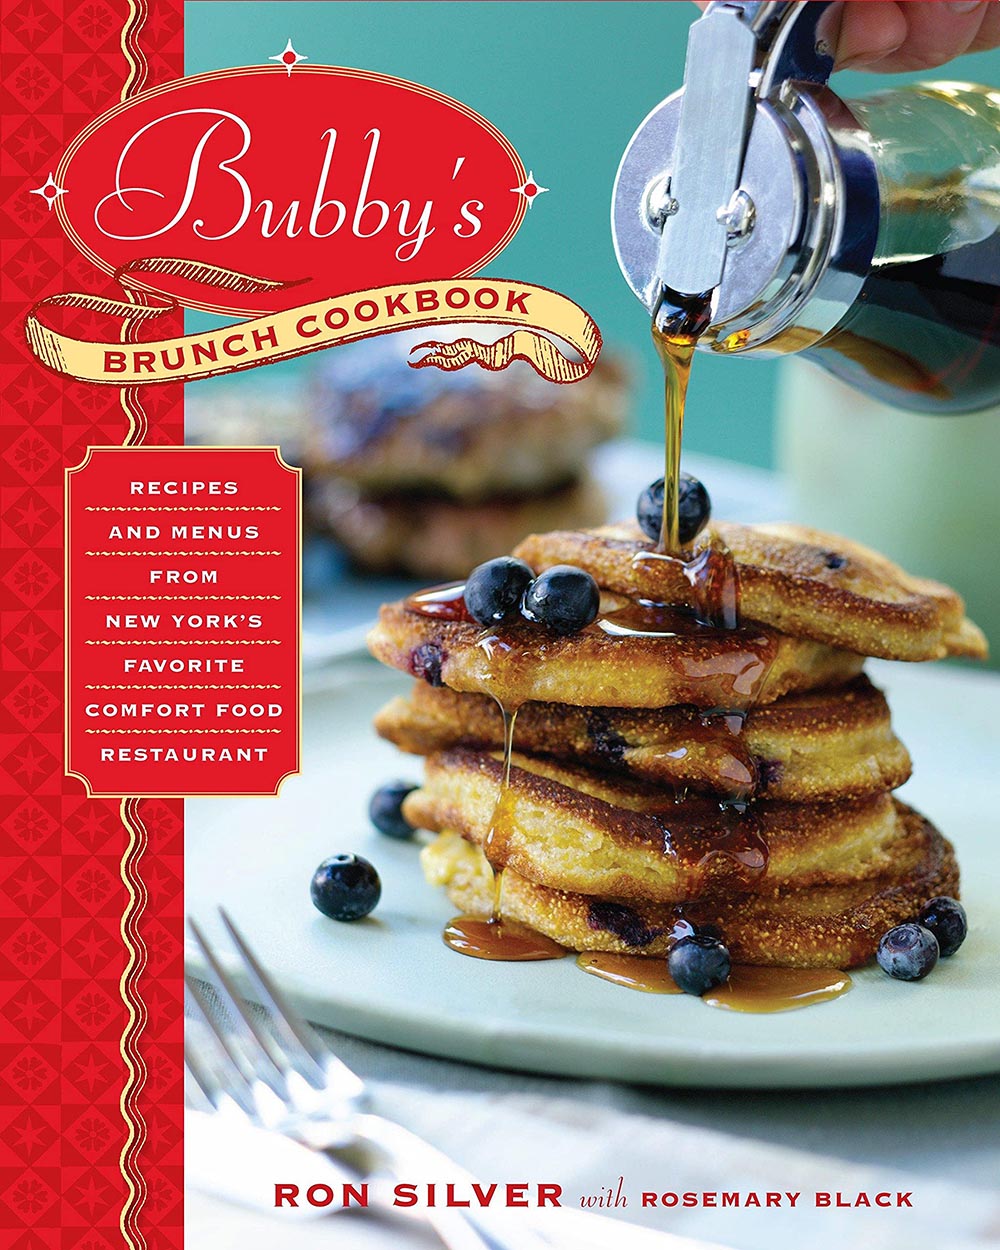 Bubby's Brunch Cookbook by Ron Silver.